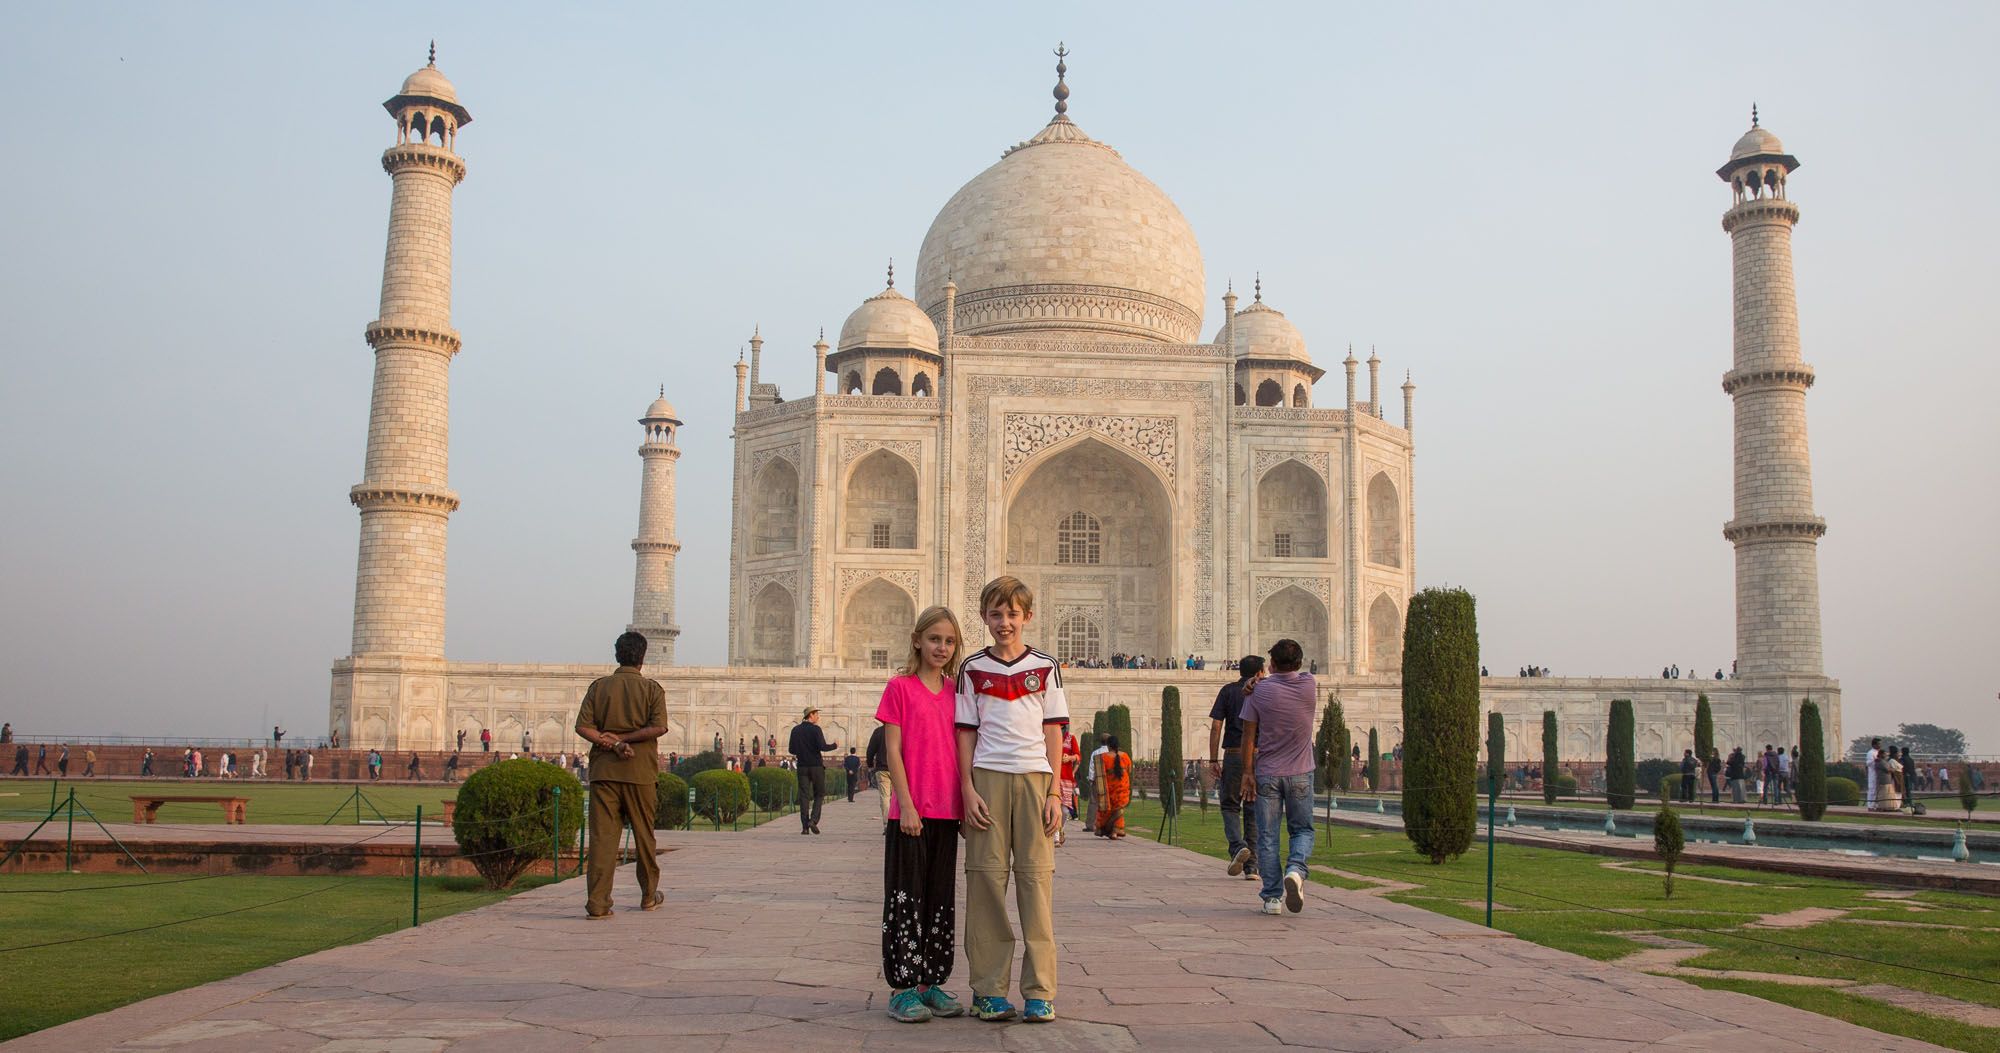 Featured image for “The Taj Mahal in Photos”